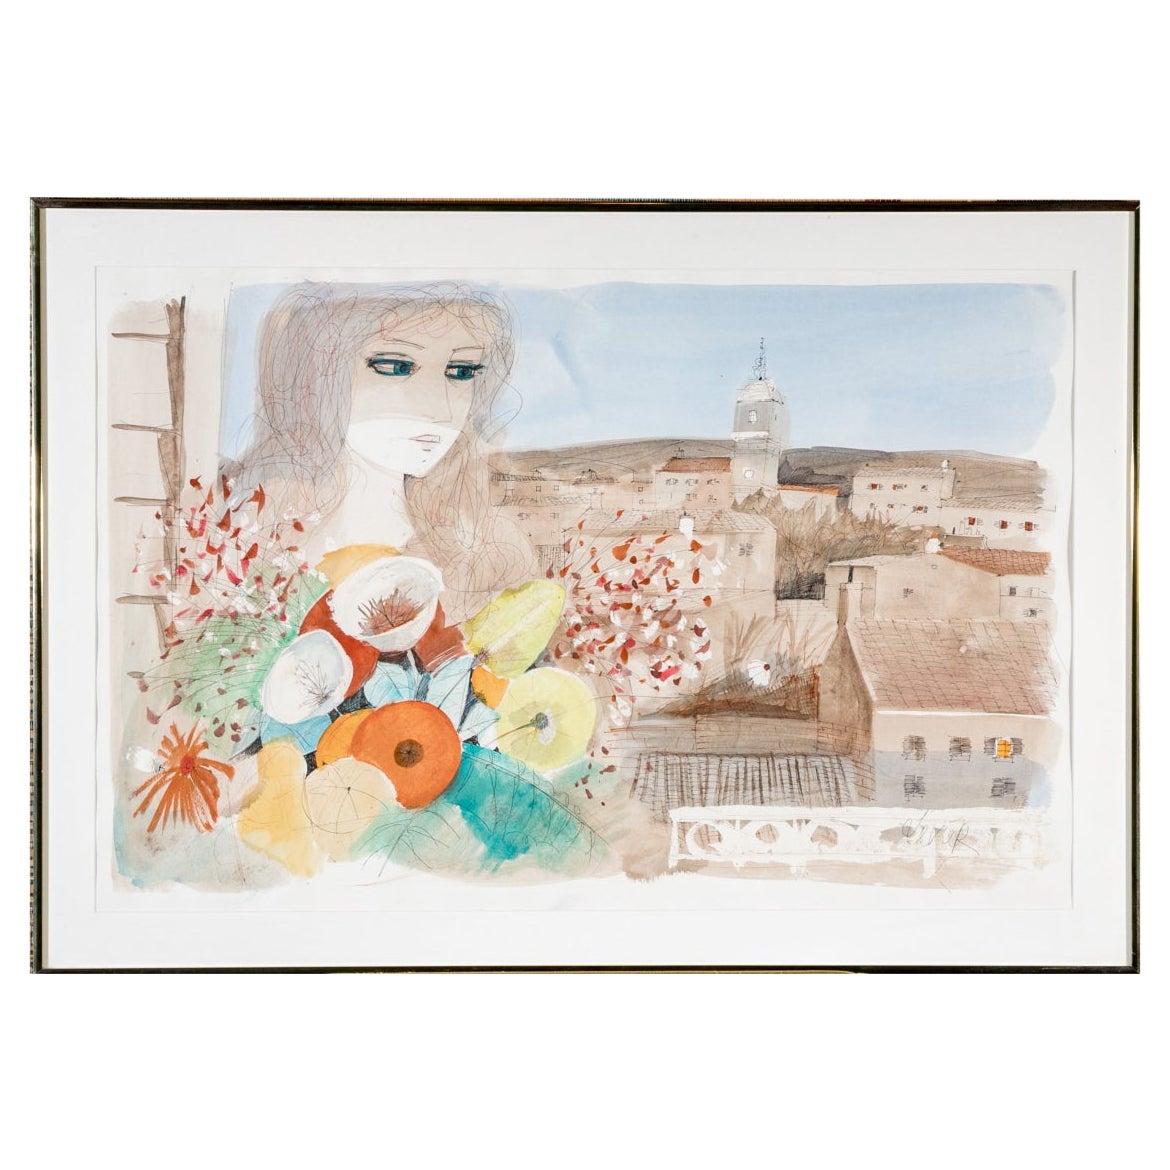 Charles Levier (French, 1920 - 2003) Large Watercolor & Ink Girl With Flowers